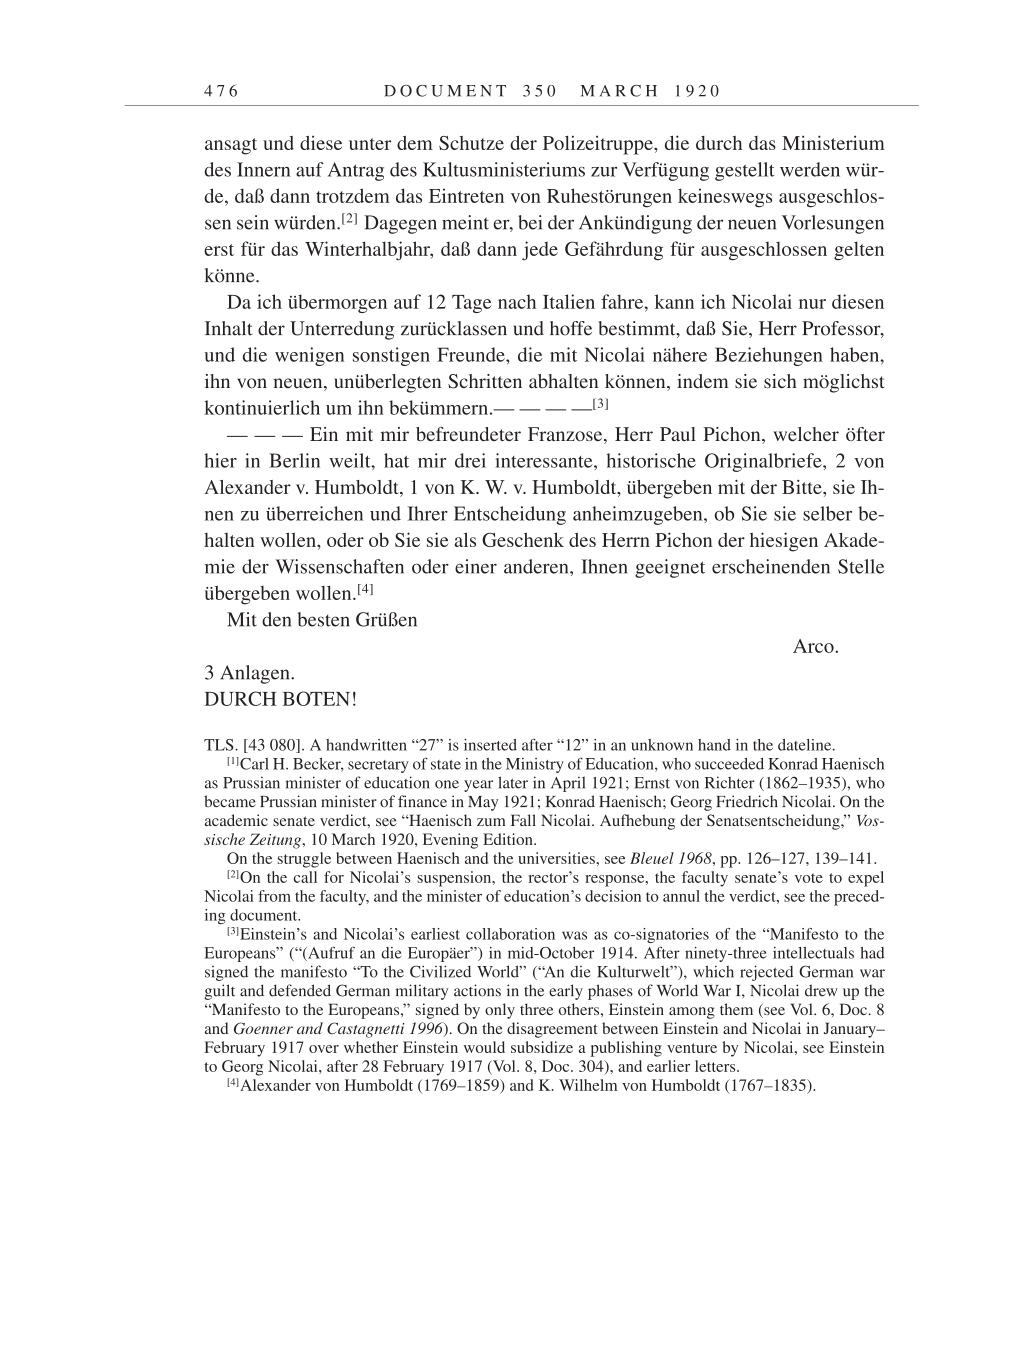 Volume 9: The Berlin Years: Correspondence January 1919-April 1920 page 476